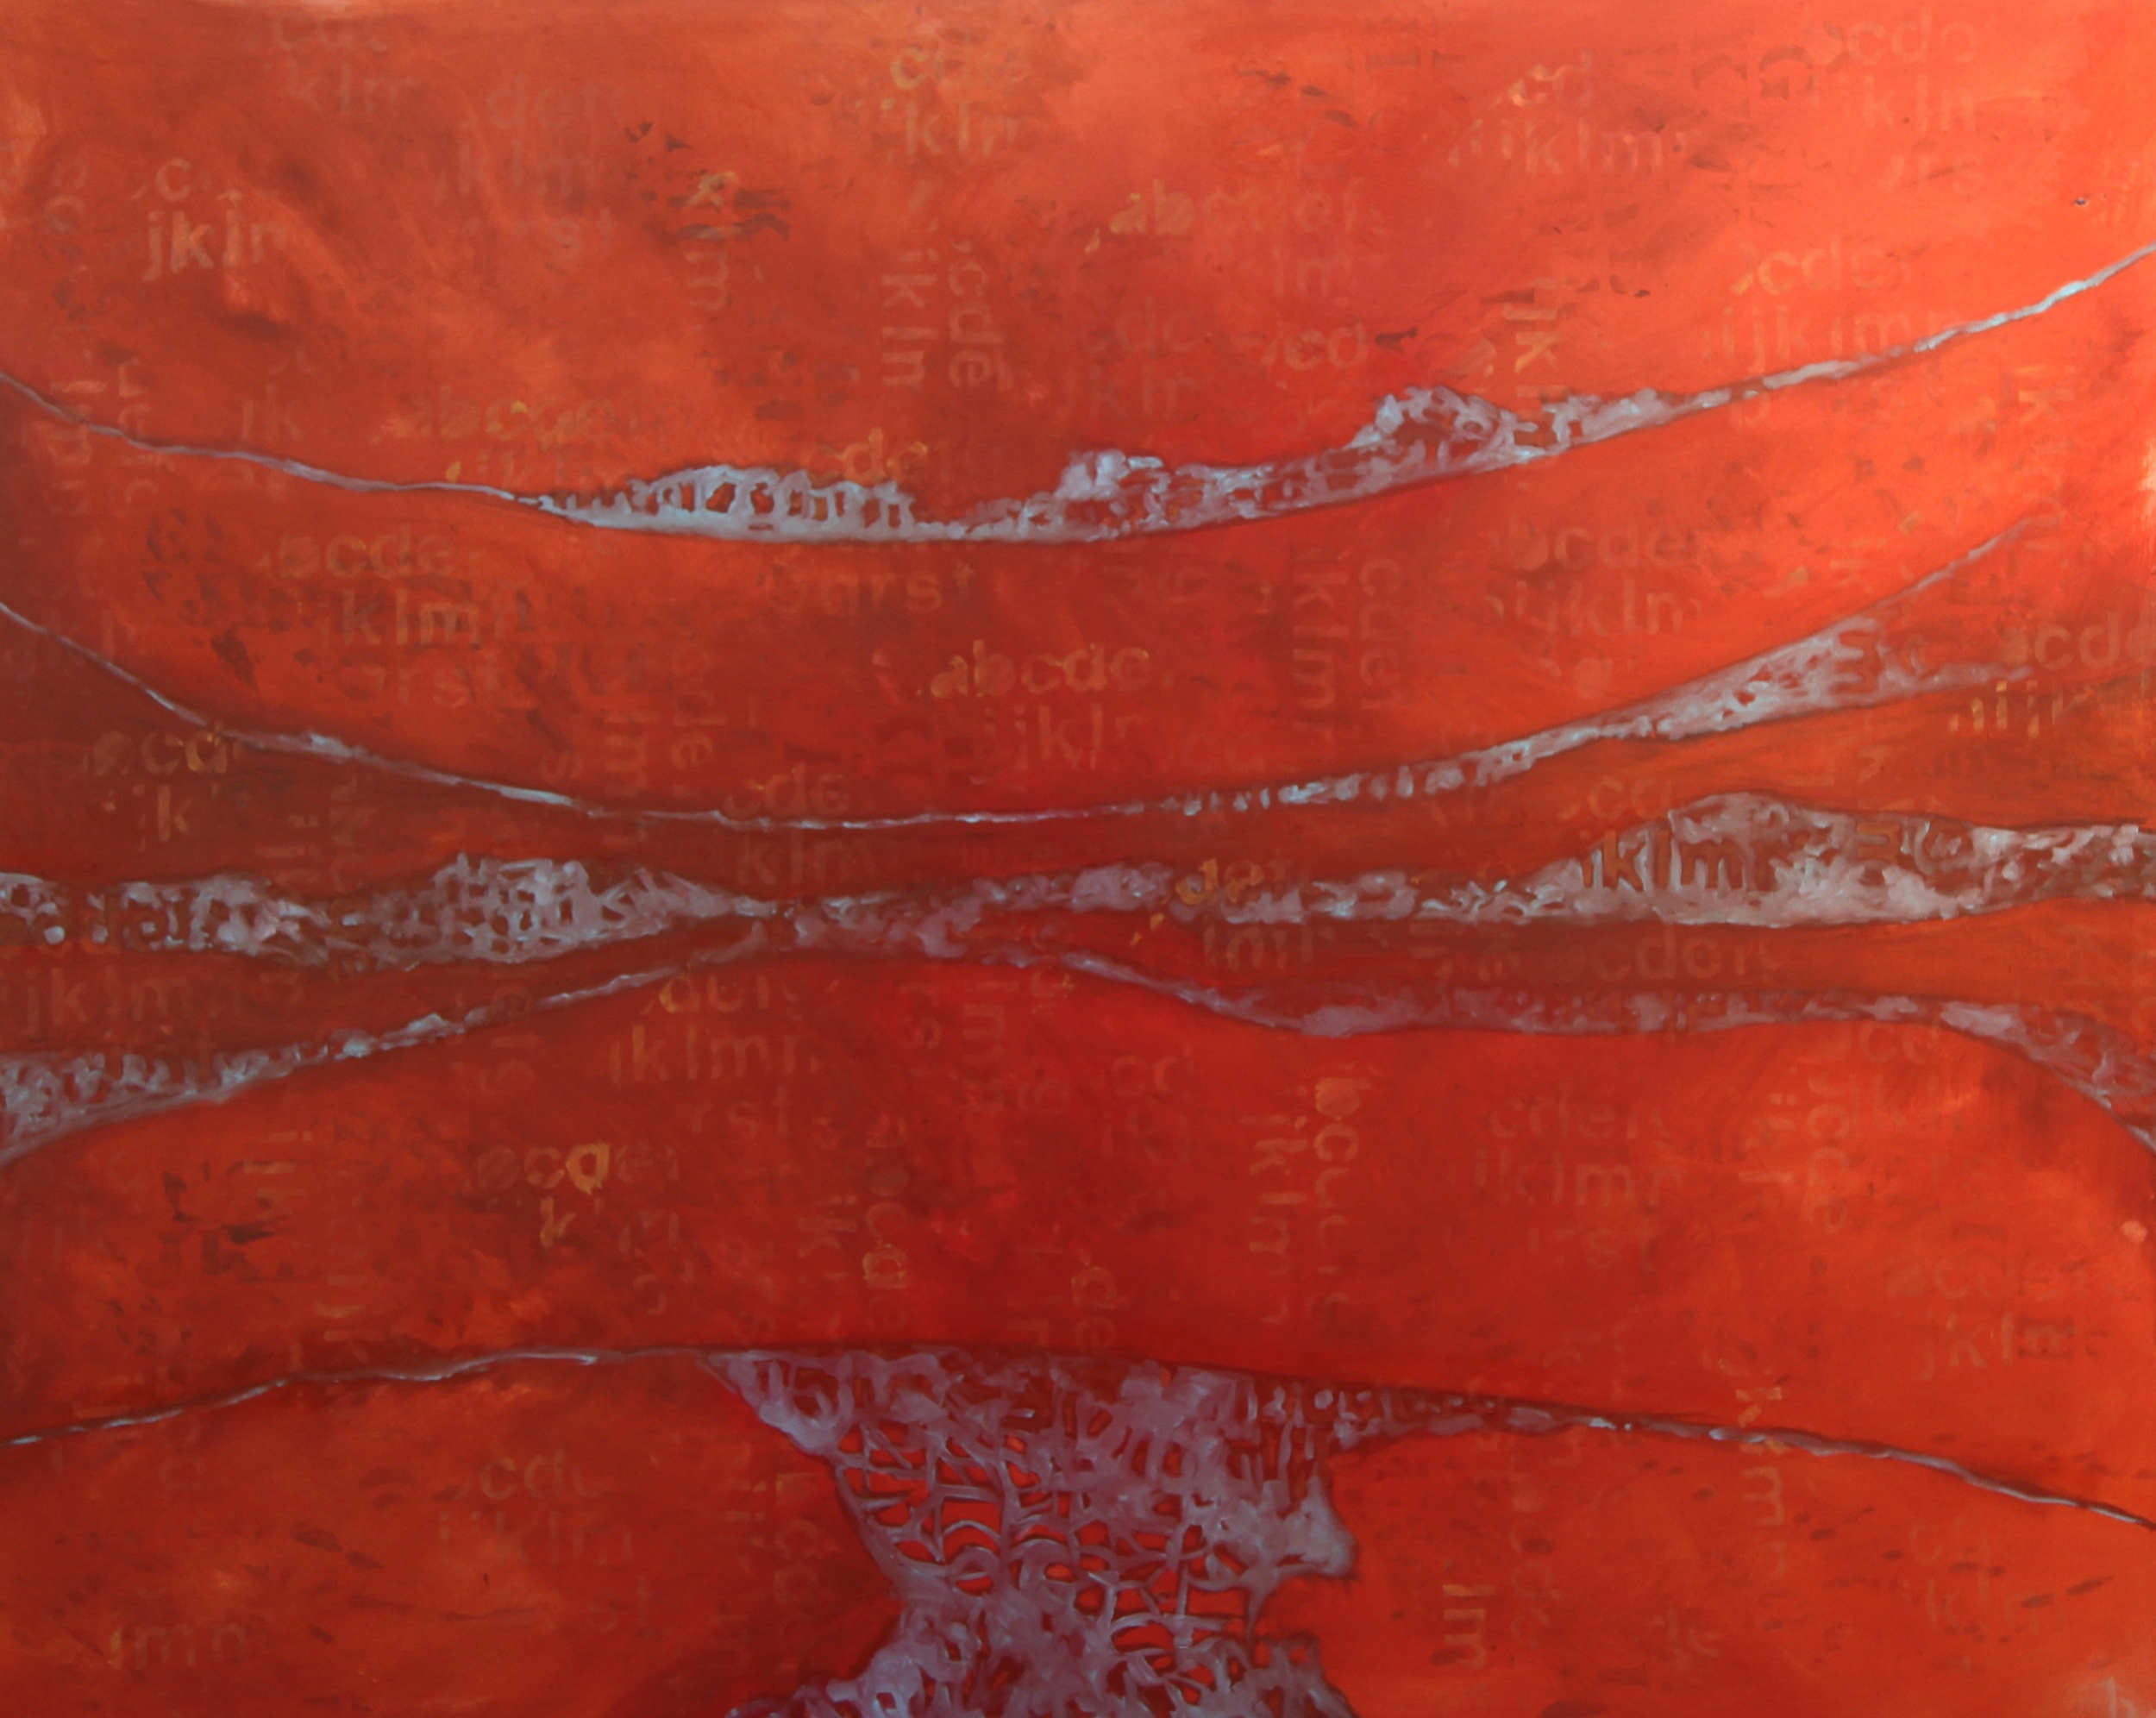   Canyon Lands   oil on canvas  48" x 60"  2014  sold   